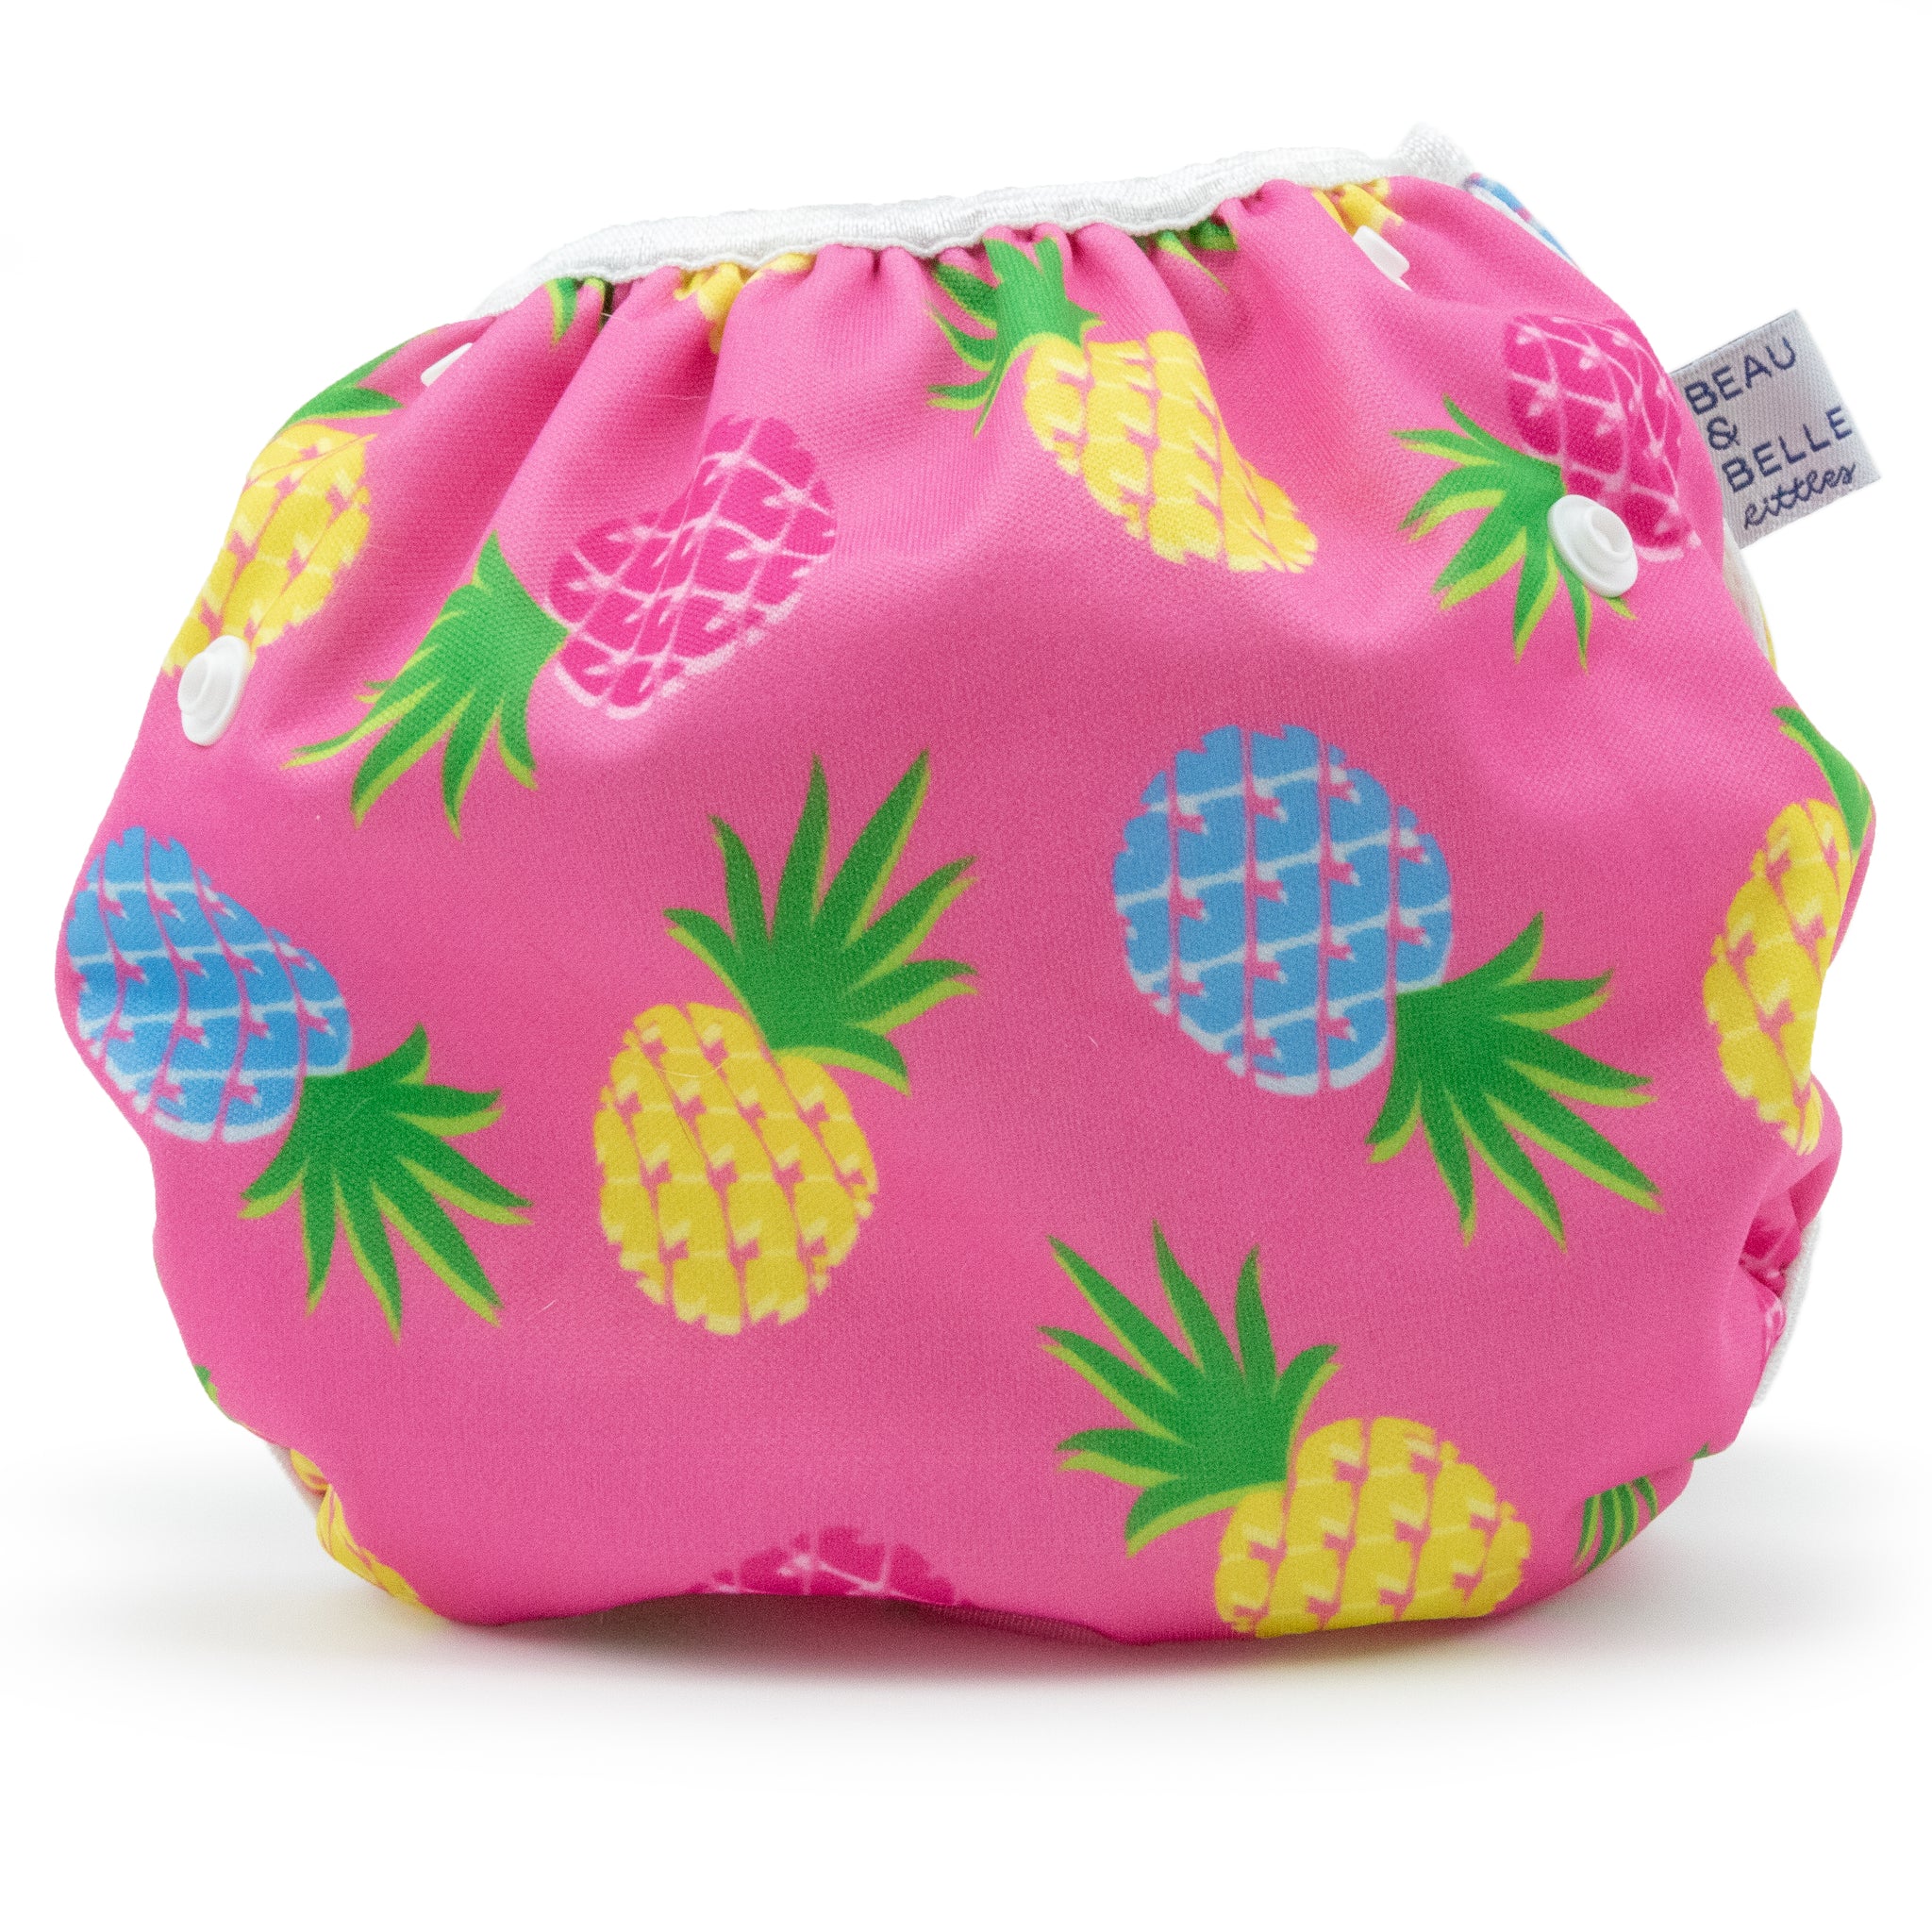 Beau and Belle Littles Swim Diaper, Large Size, light pink background with yellow, dark pink, and blue pineapples, back view